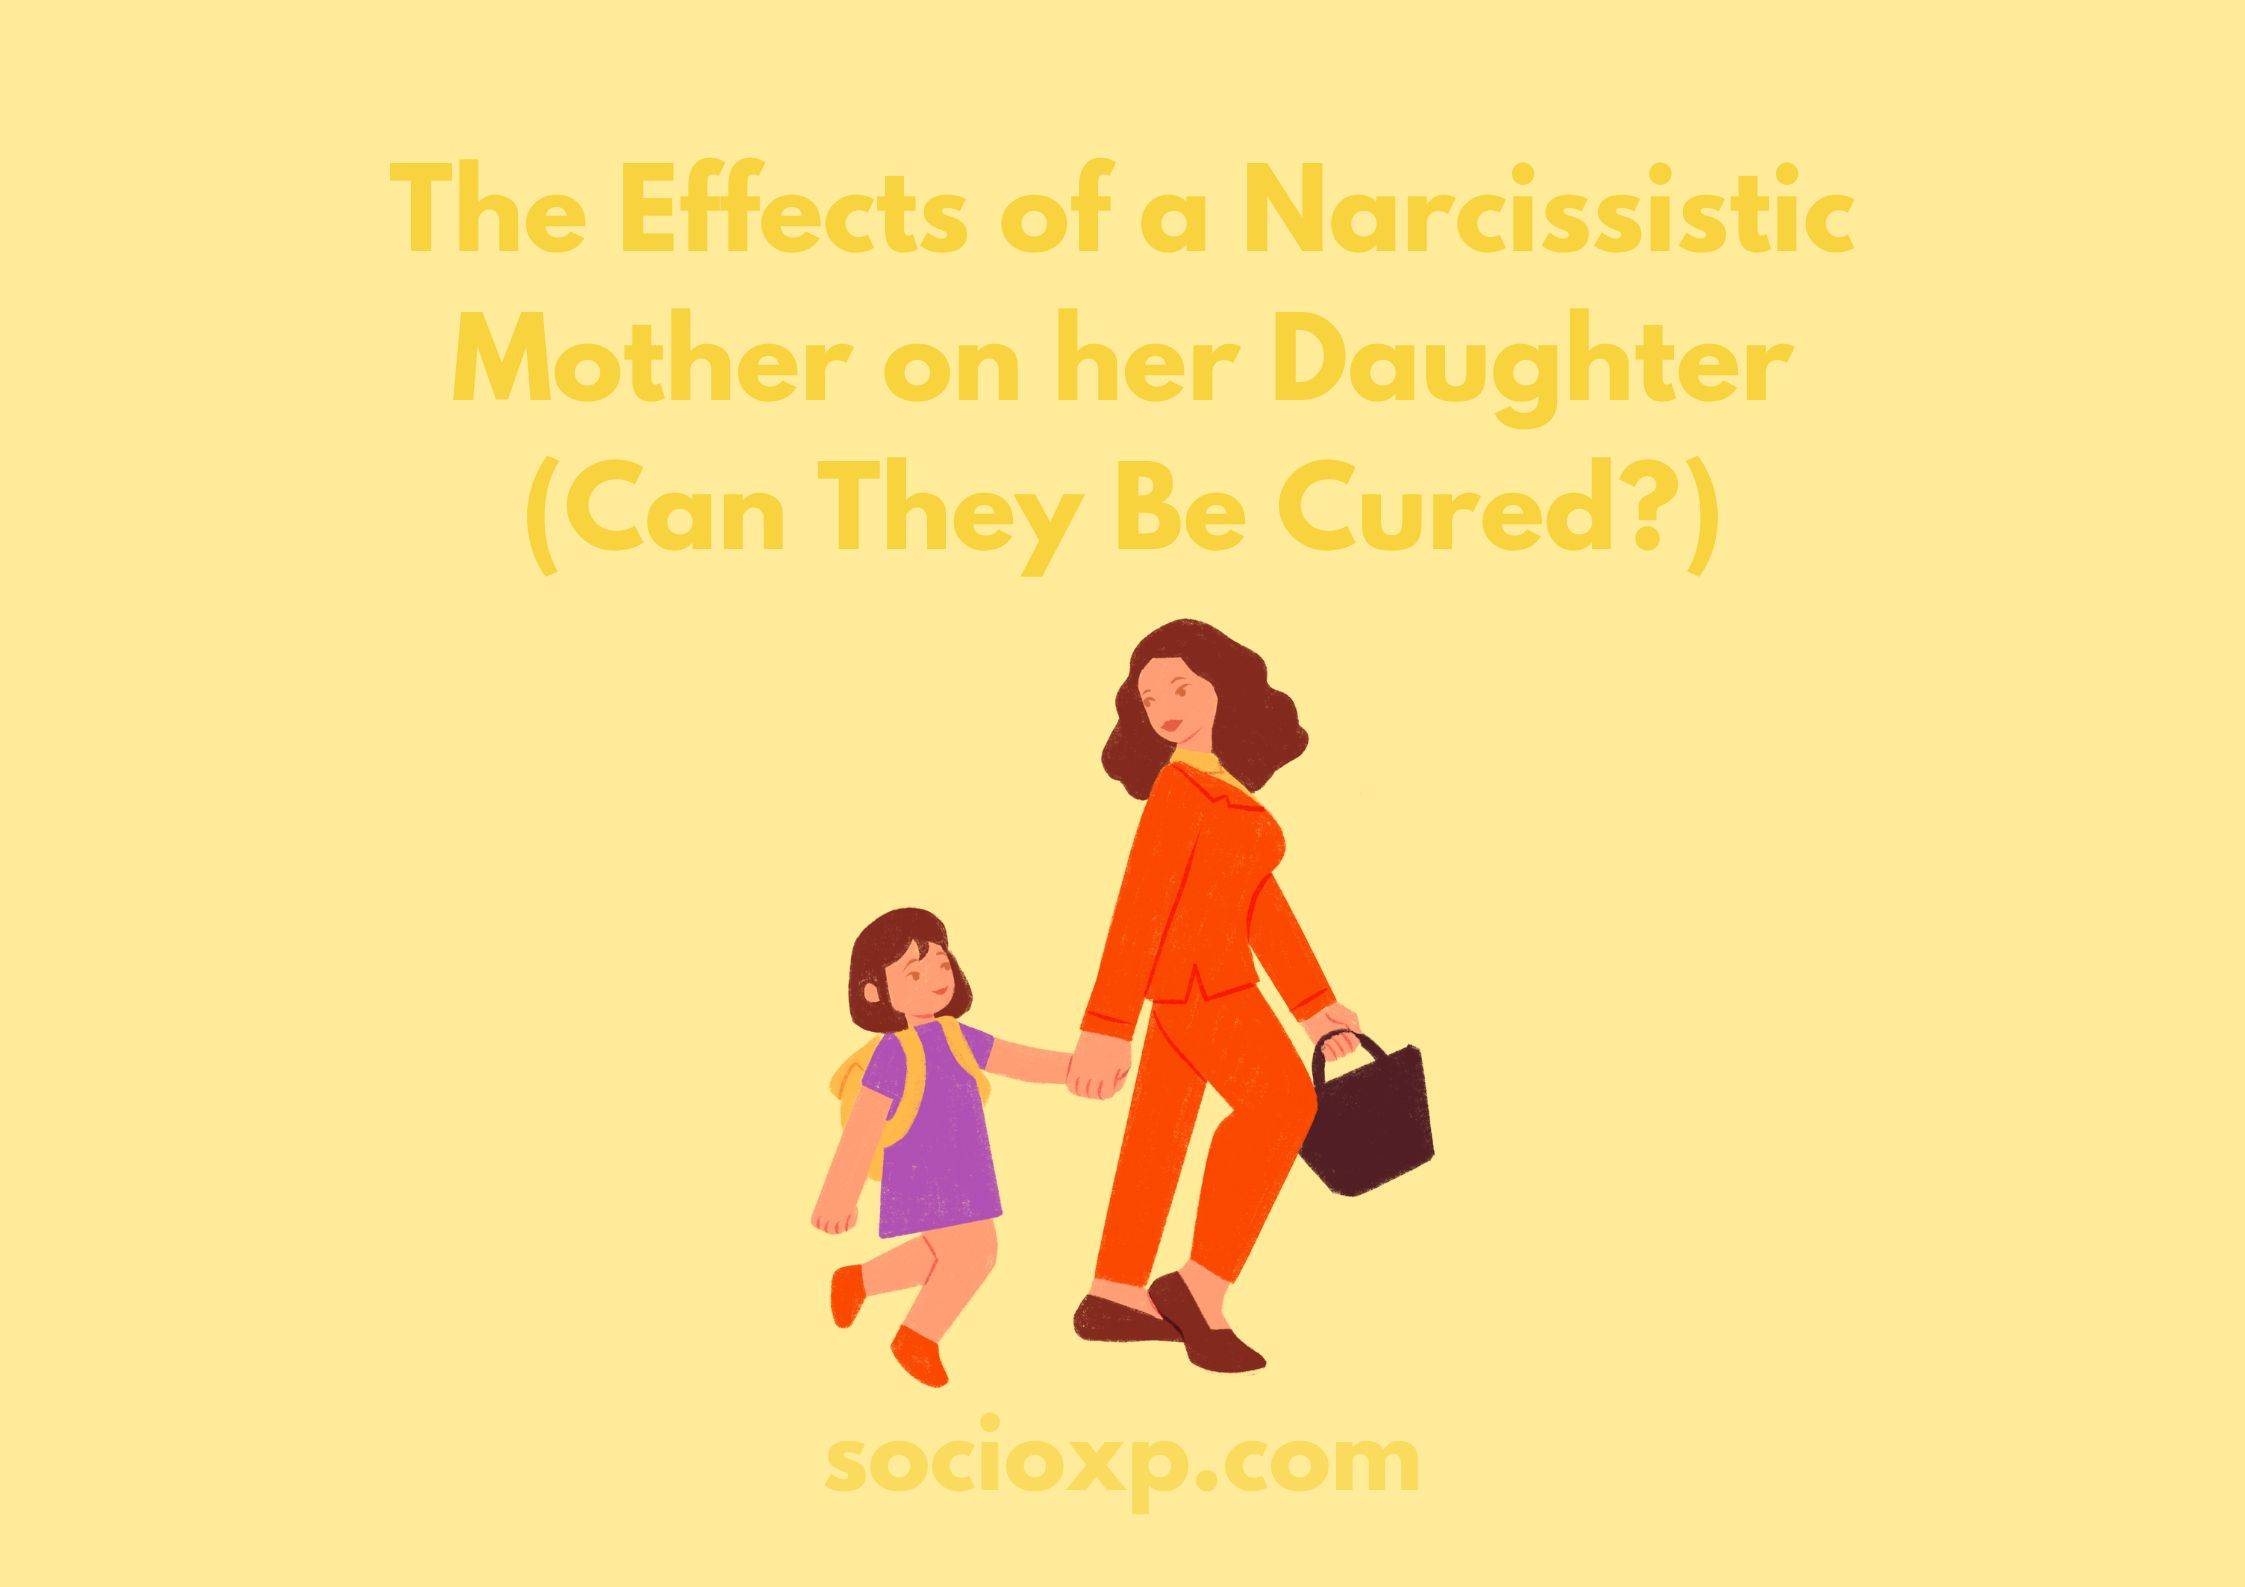 The Effects of a Narcissistic Mother on her Daughter (Can They Be Cured?)